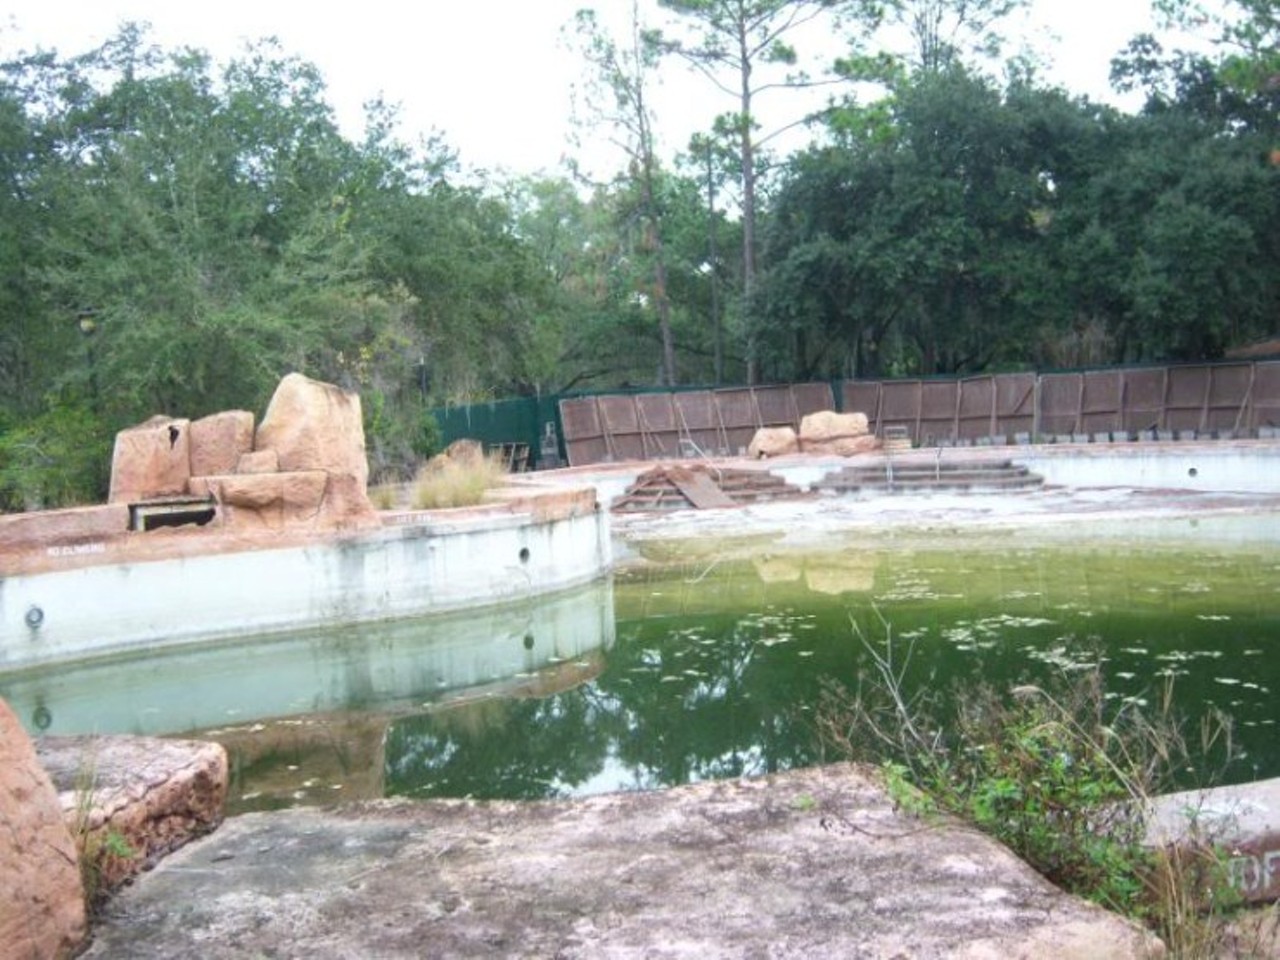 Walt Disney World&#146;s abandoned River Country
Walt Disney World's first water park remains permanently closed, with growing algae and weeds.
Photo via disneyparks.disney.go.com